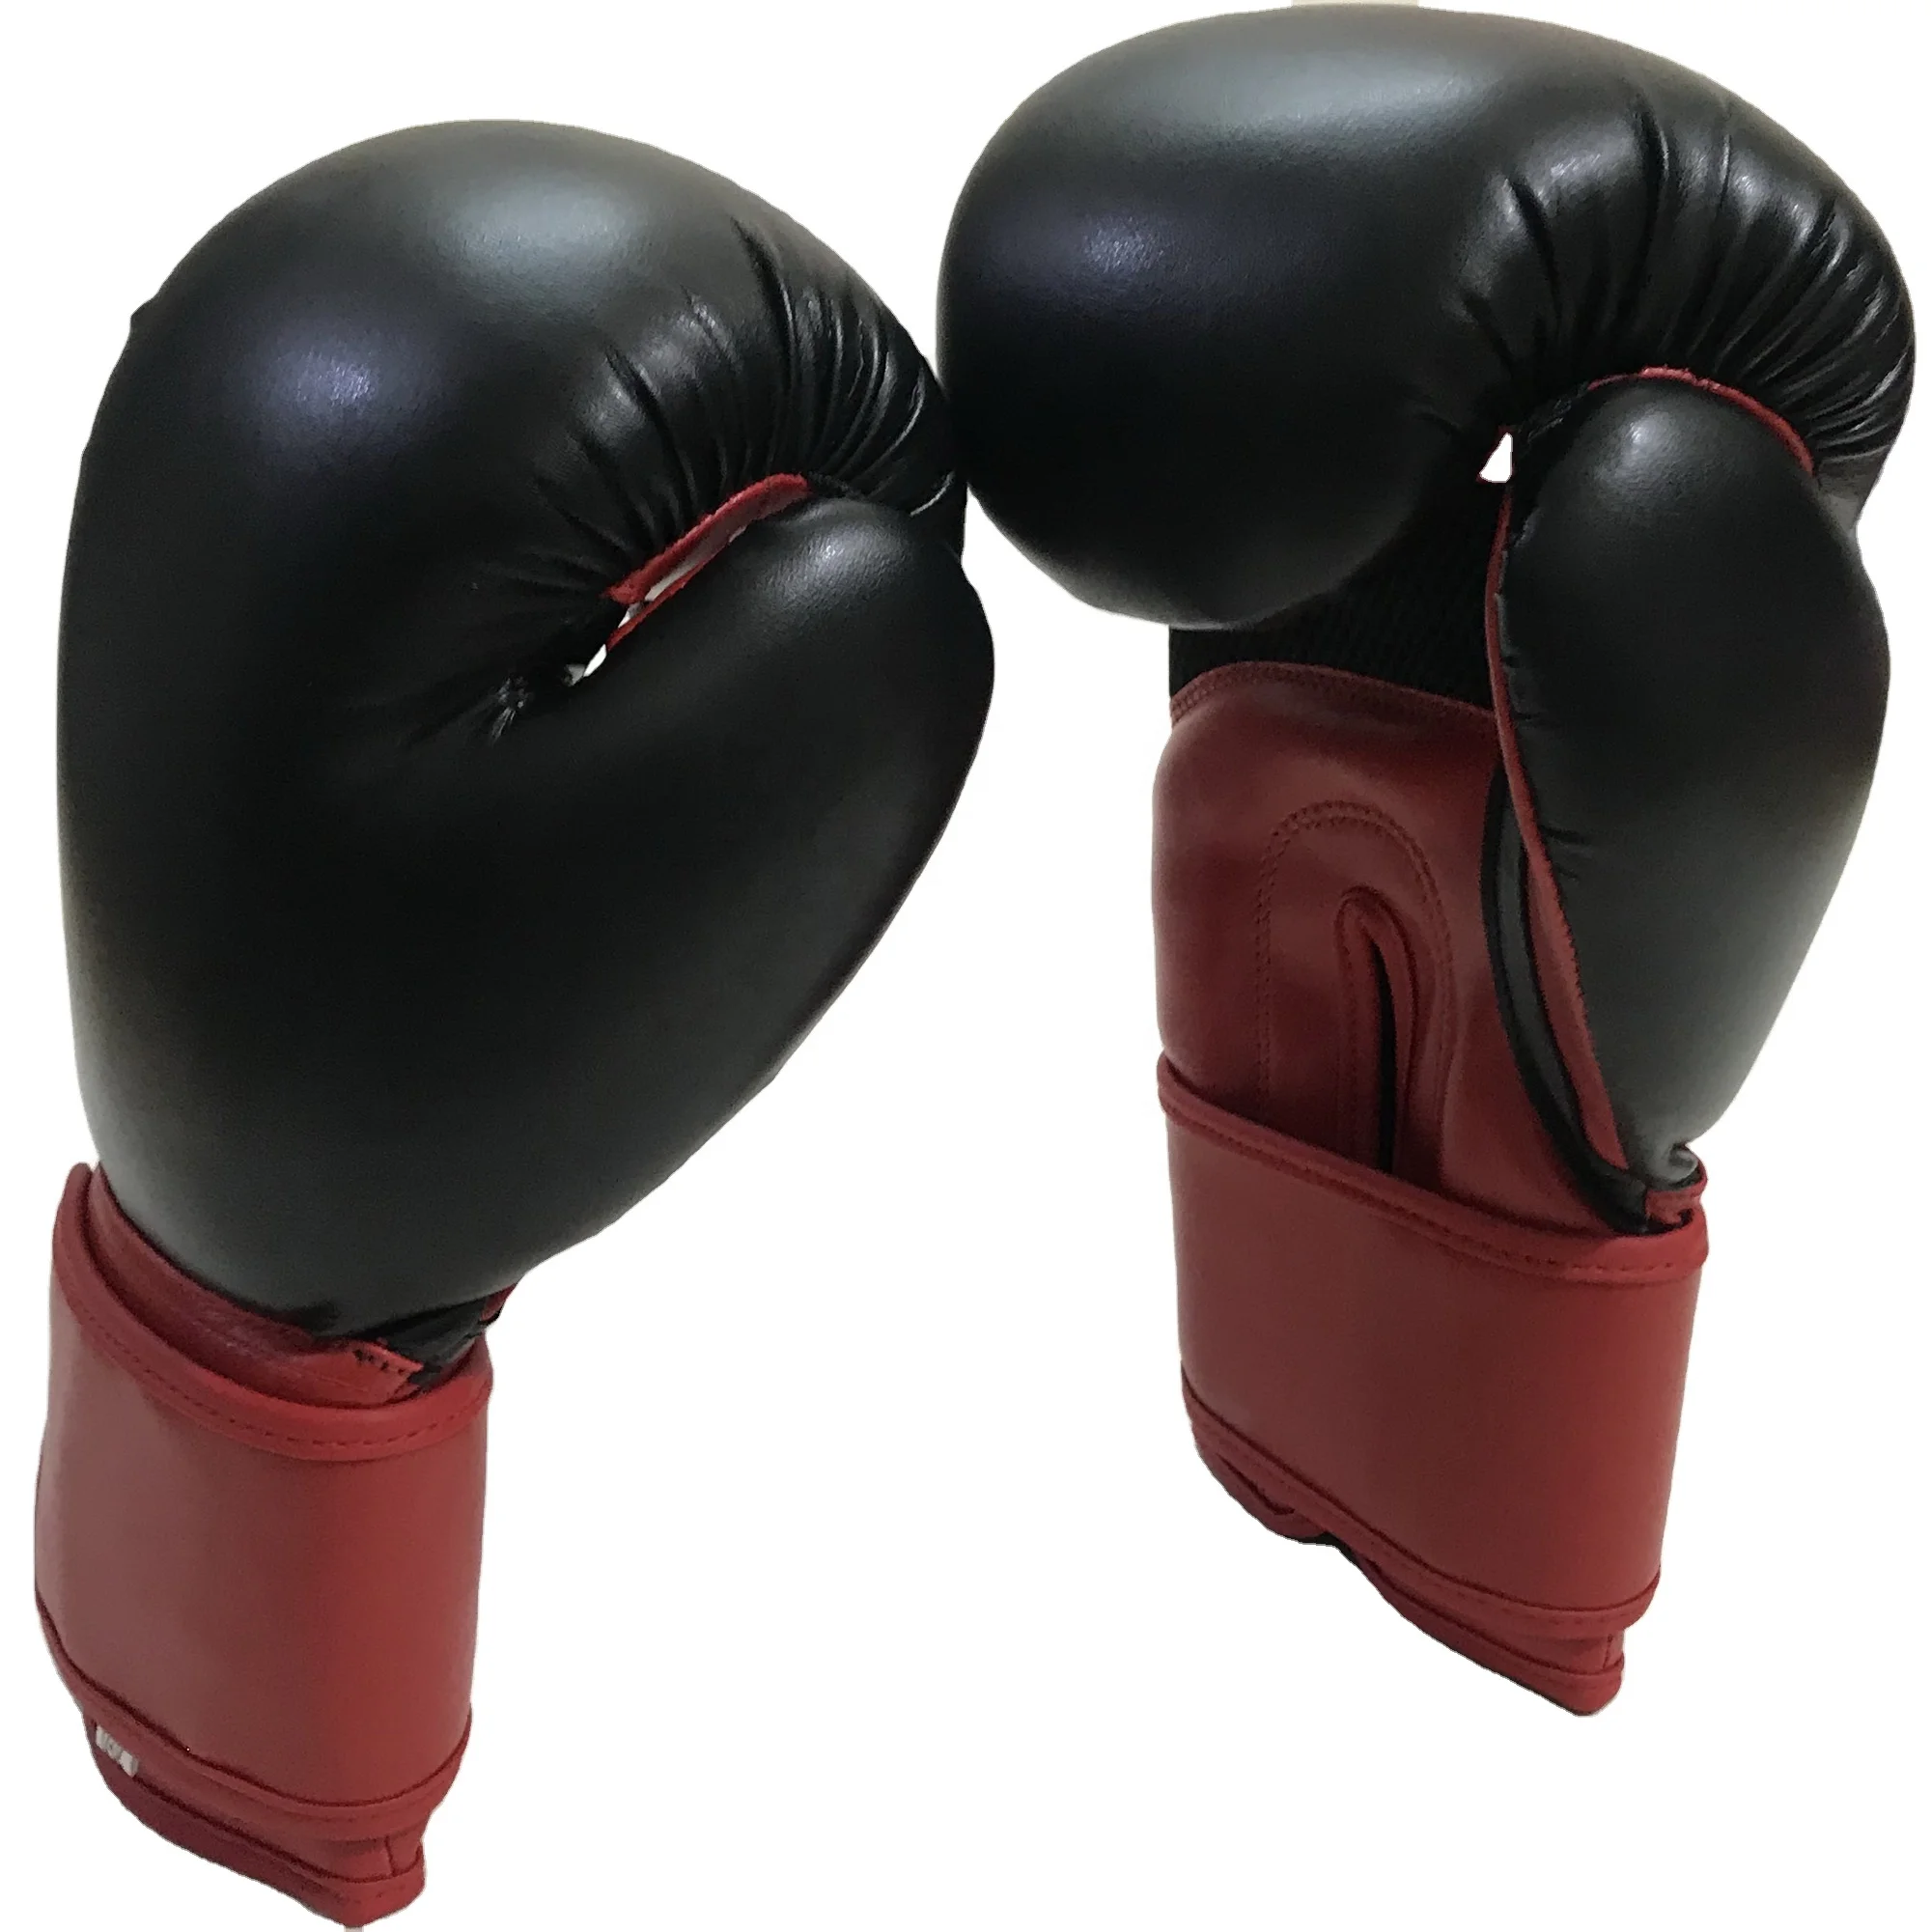 Boxing Gloves Sparring Punch Bag Gym Training Fight MMA Muay Thai Kickboxing 